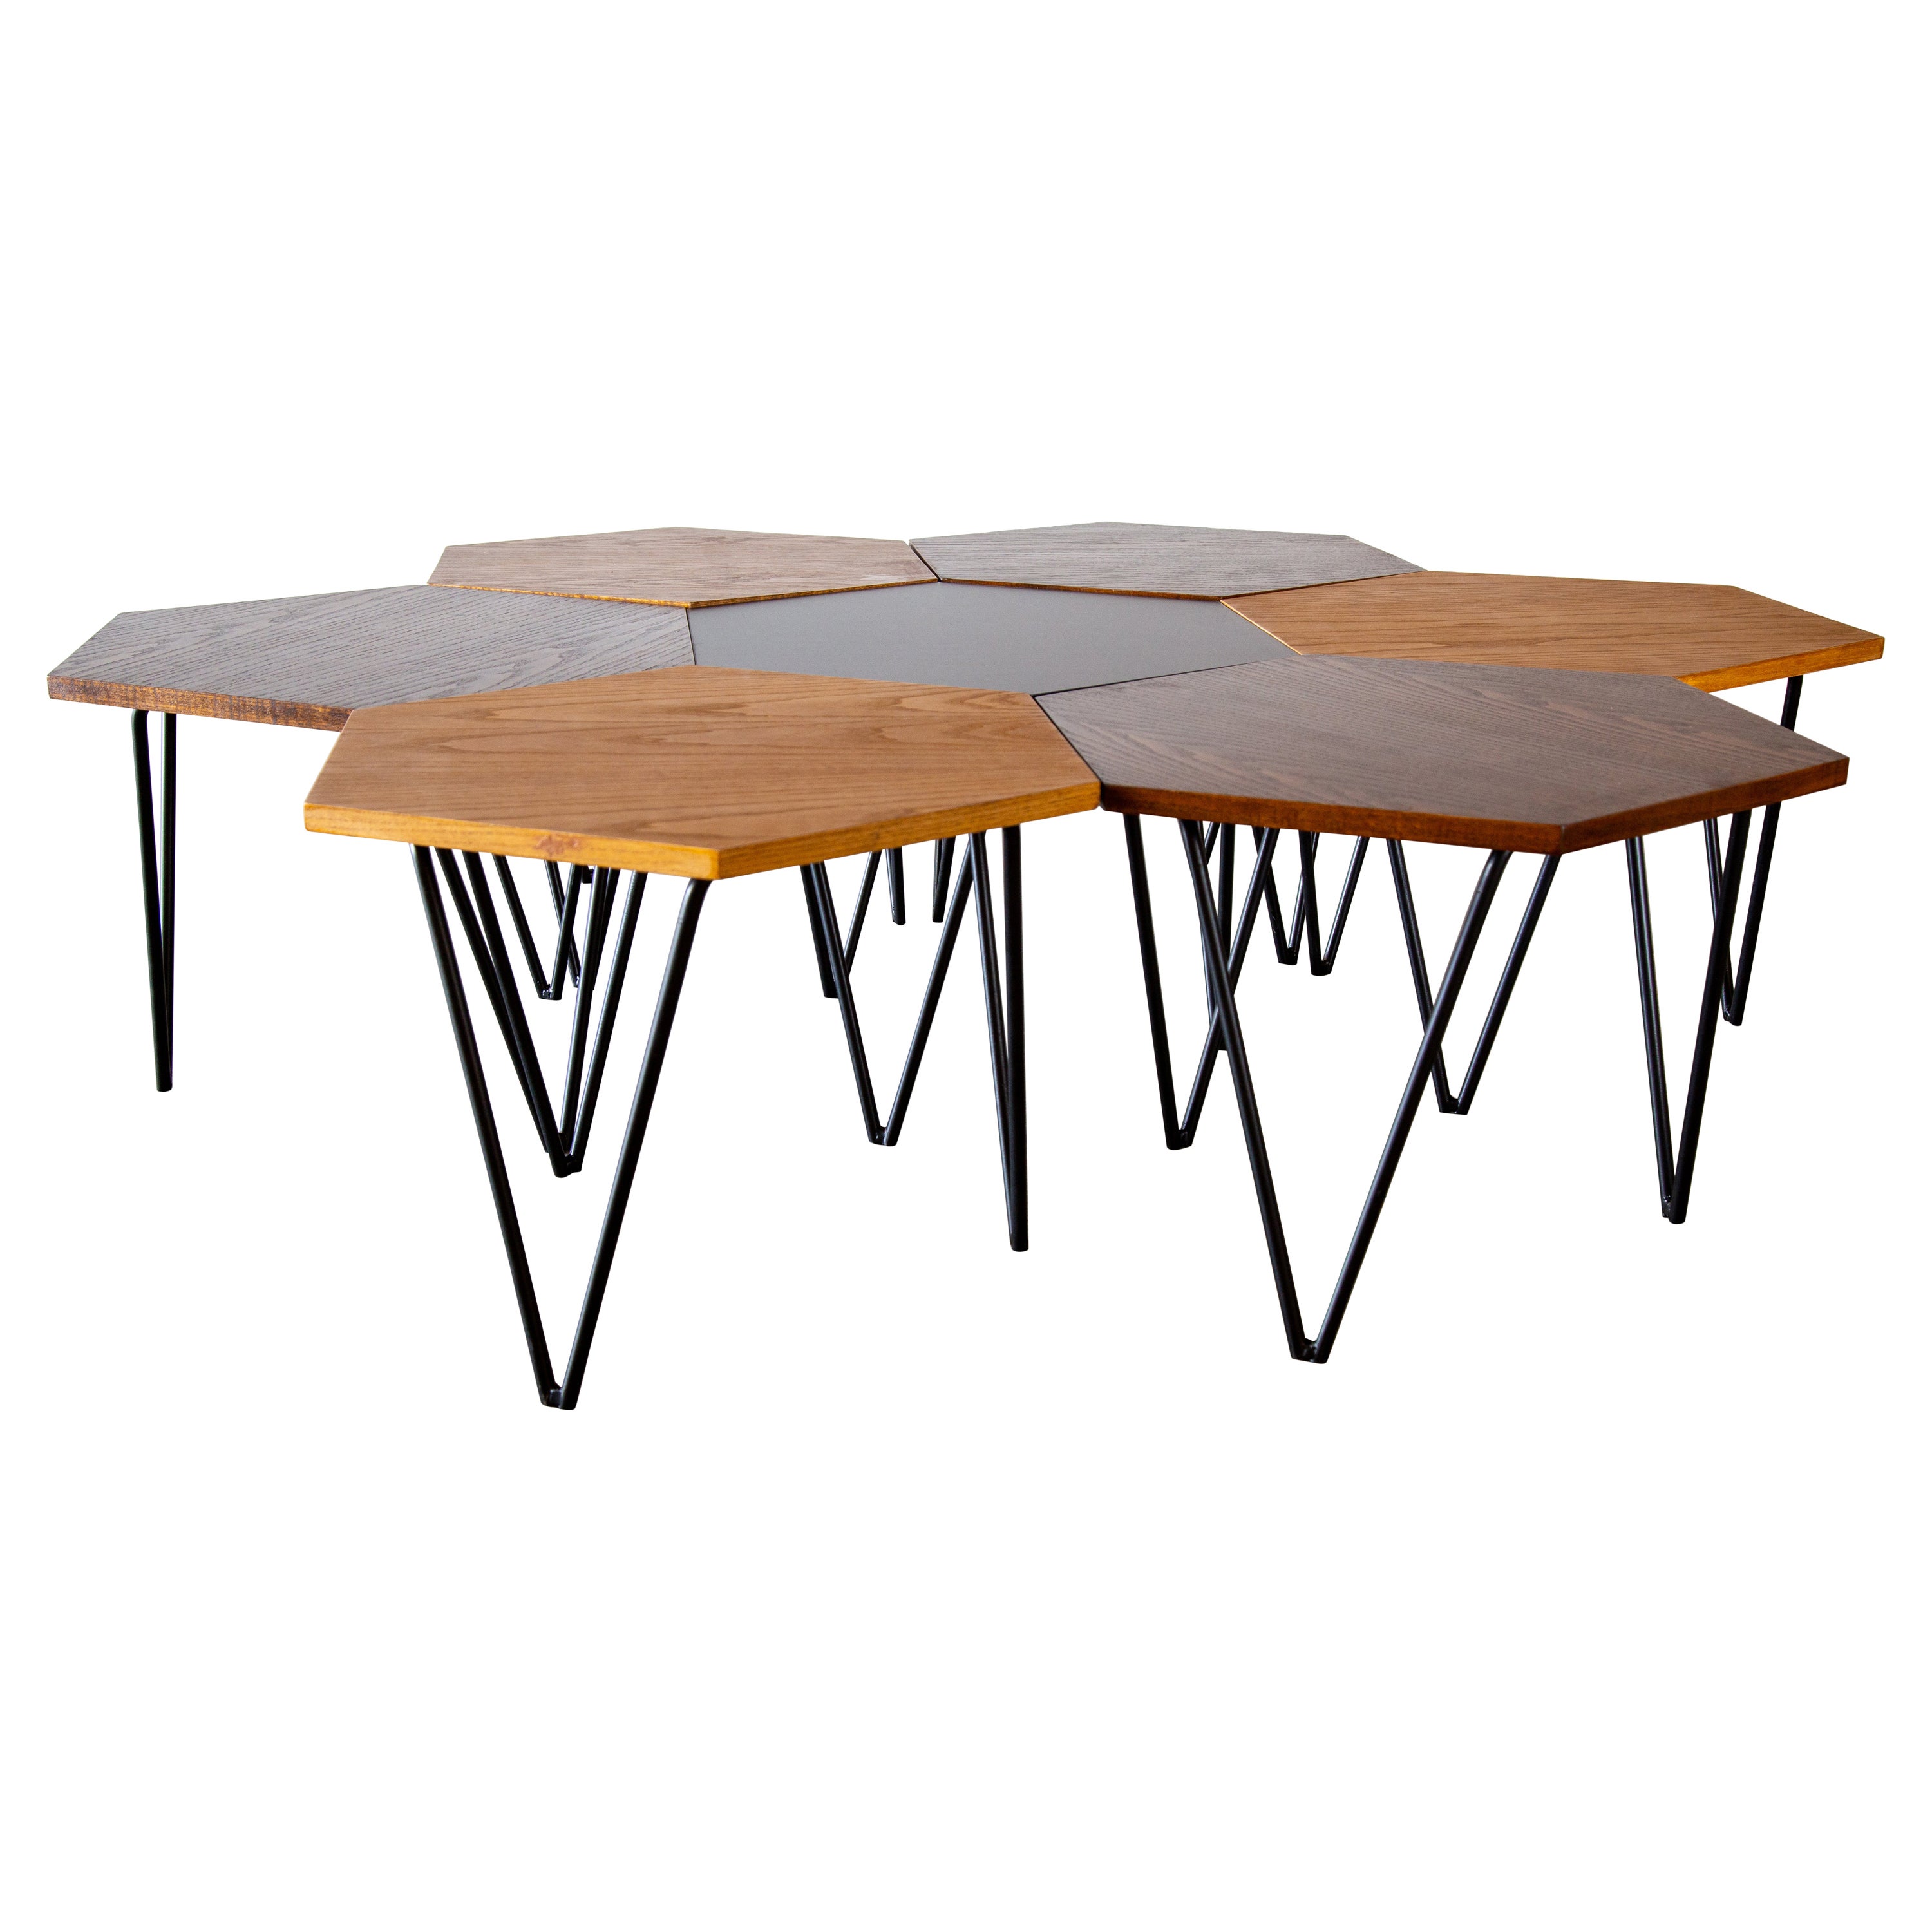 Set of 7  Gio Ponti for ISA Hexagonal tricolor tables, 1950s Laminate Oak Steel